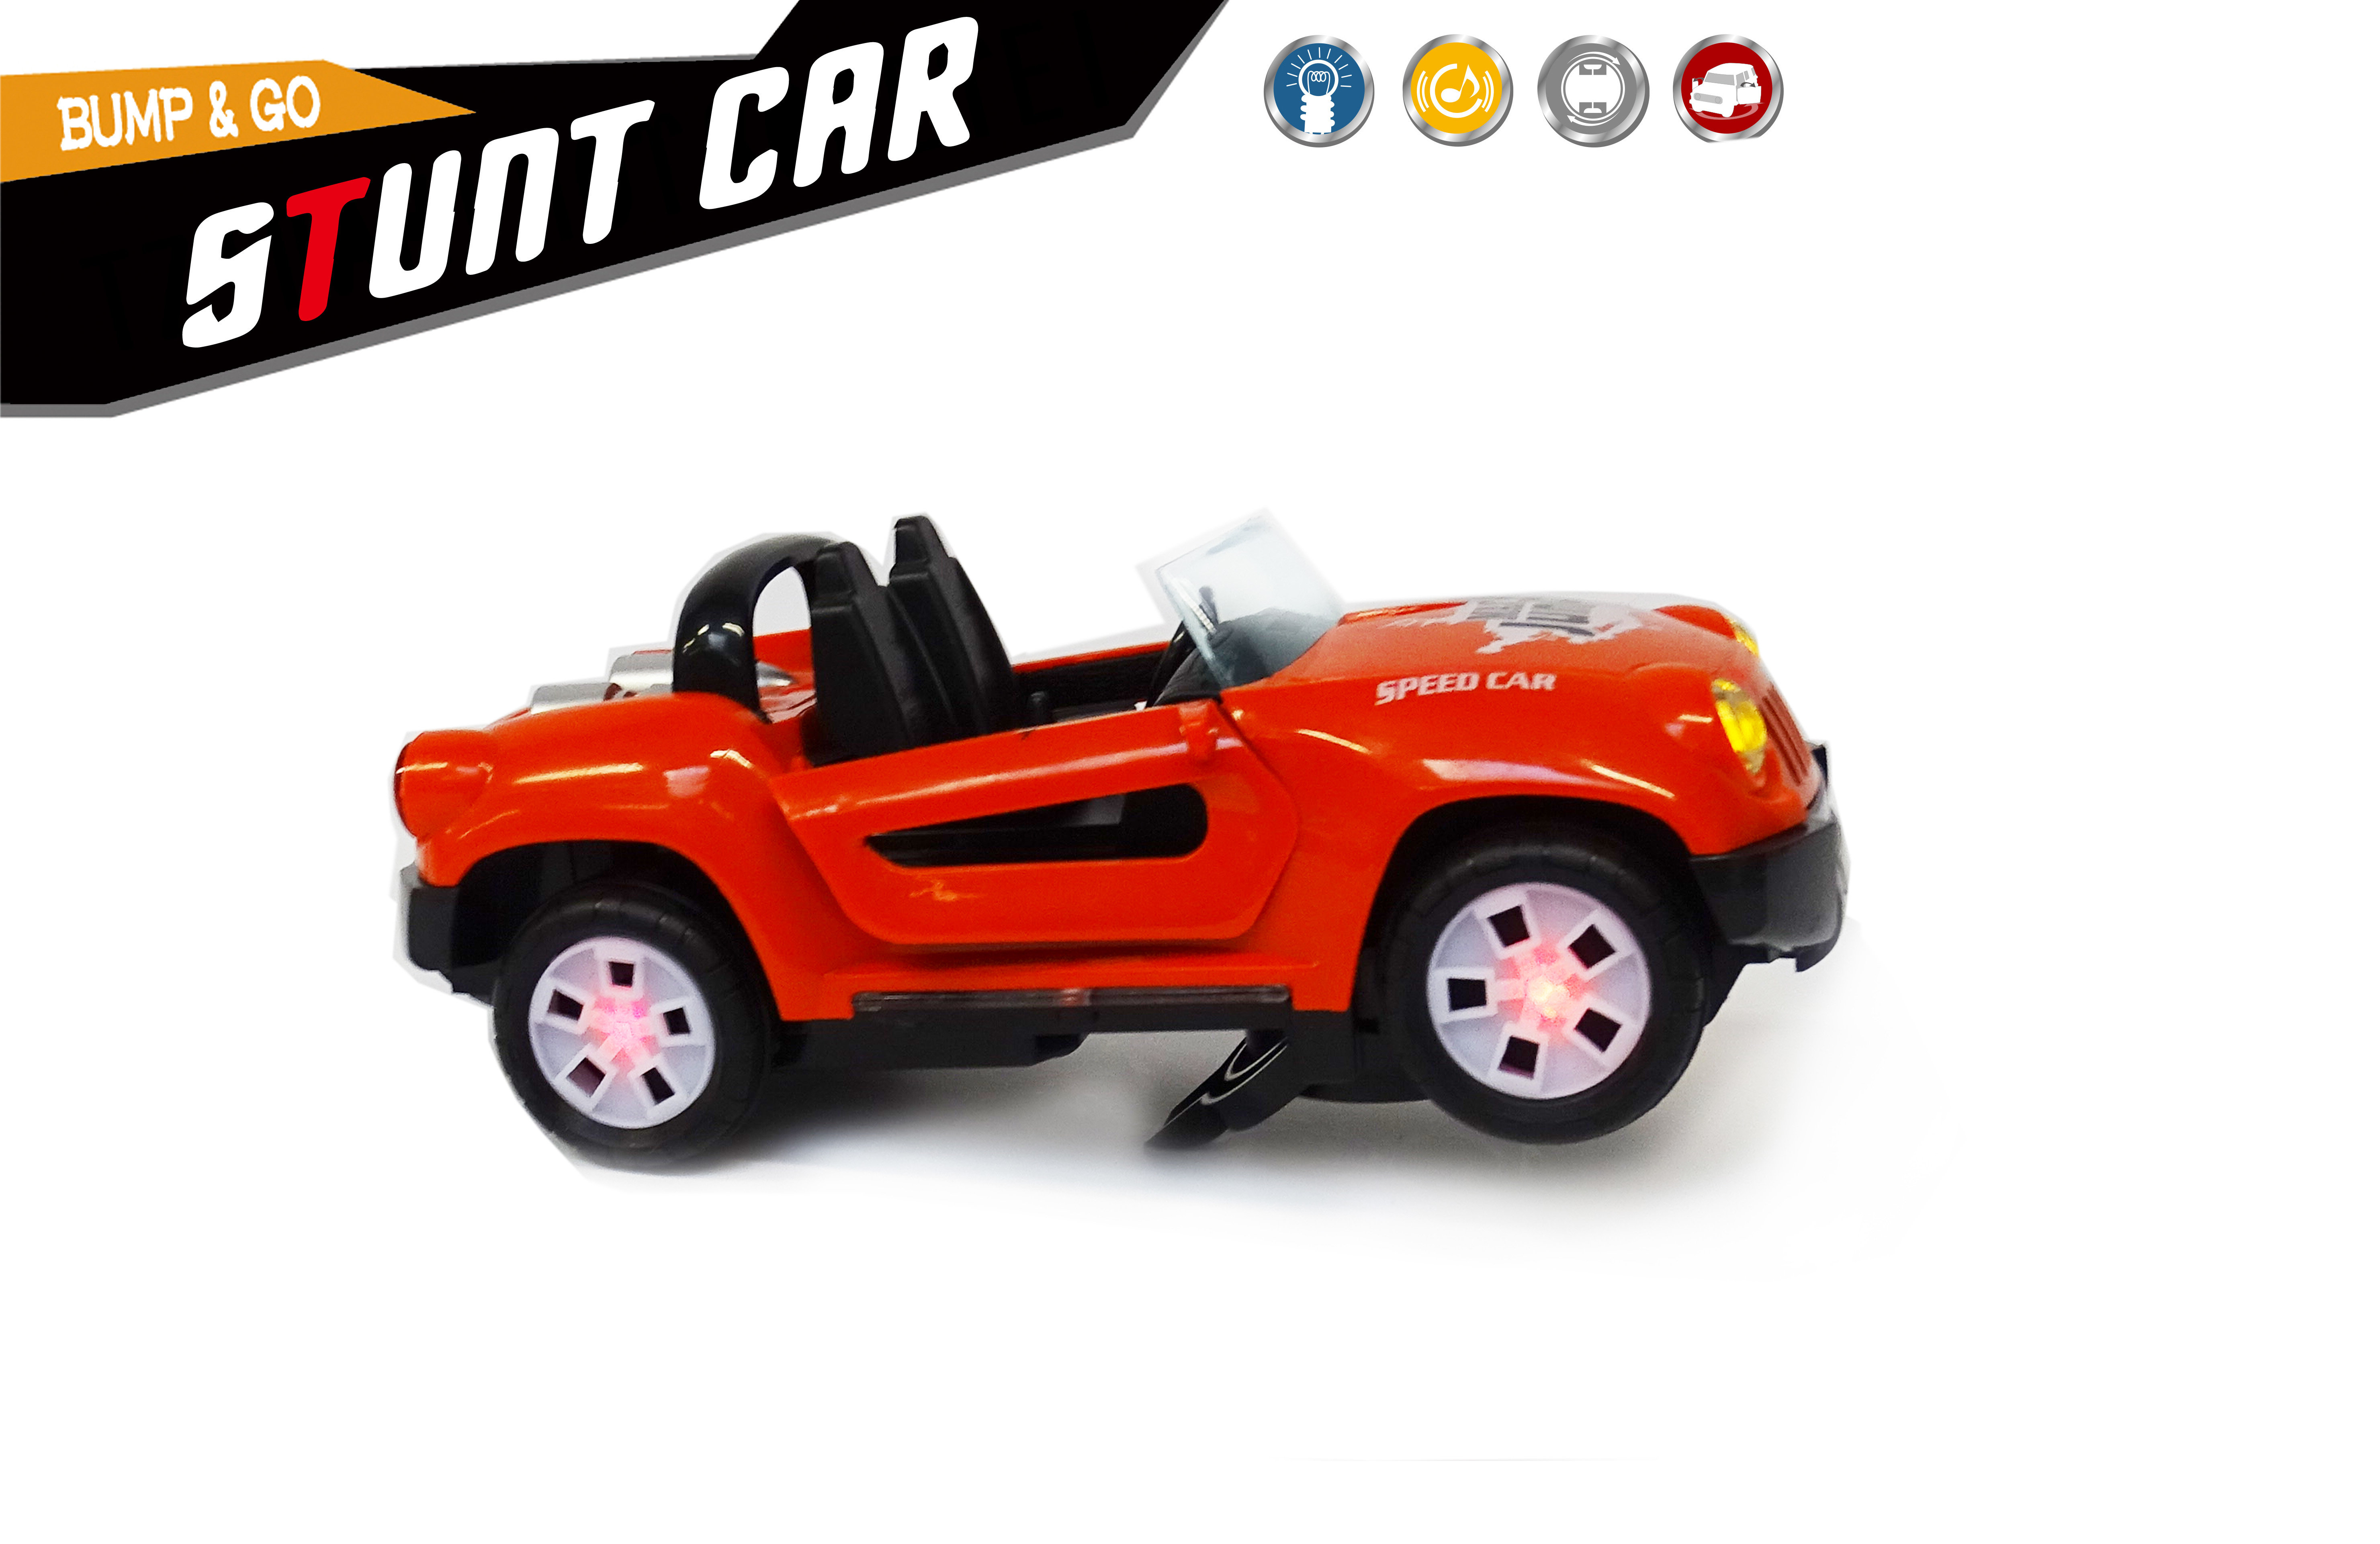 Stunt car toy - Super Max - Hummer with acrobatic movement -Led light and sound (19CM)